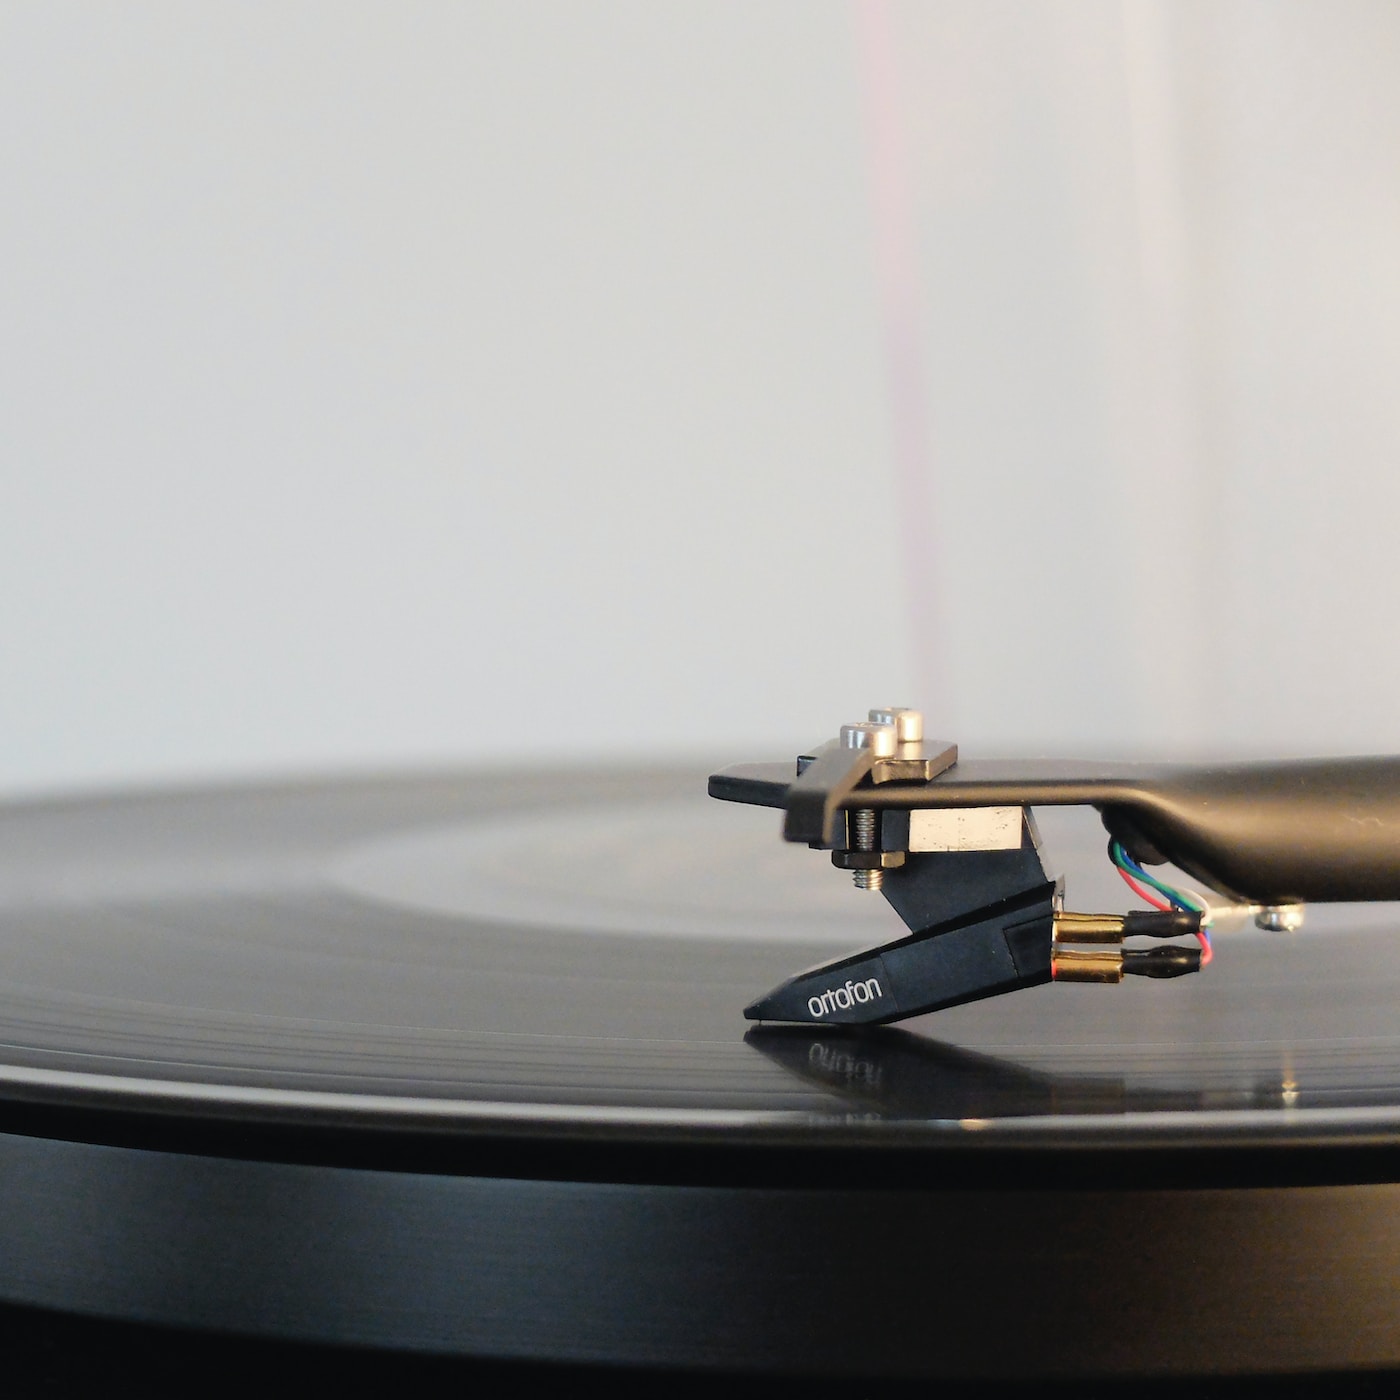 7 Vinyls That You Should Add to Your Record Collection ...